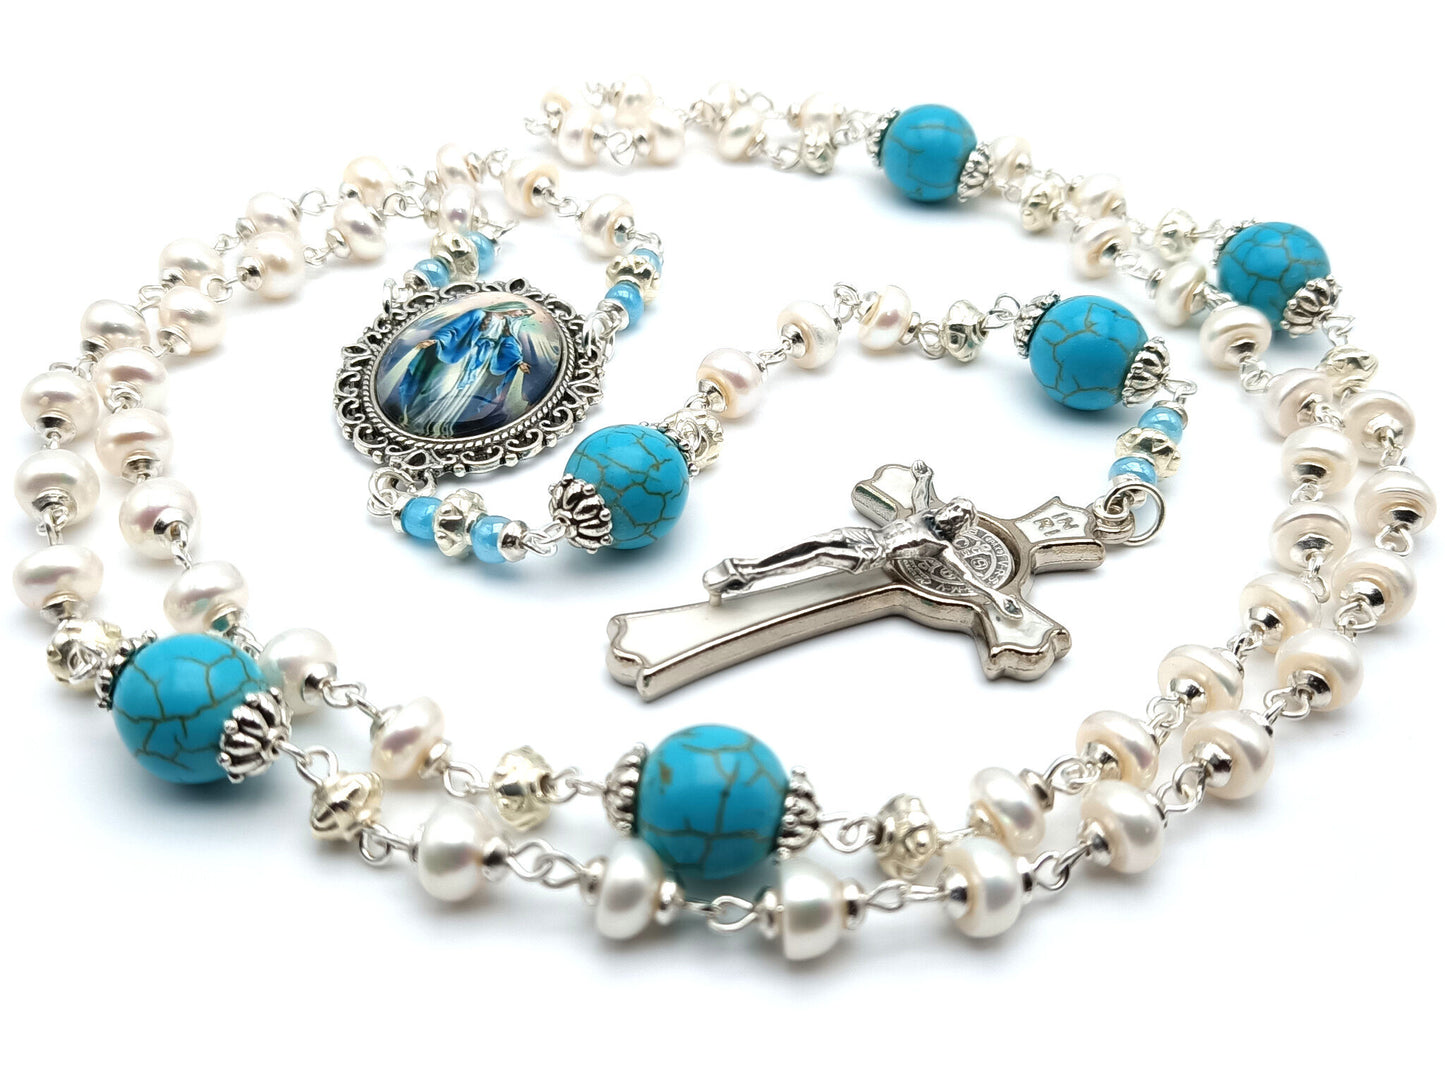 Our Lady of Grace unique rosary beads with genuine pearl beads, silver and white enamel Saint Benedict crucifix, blue gemstone pater beads and picture centre medal.